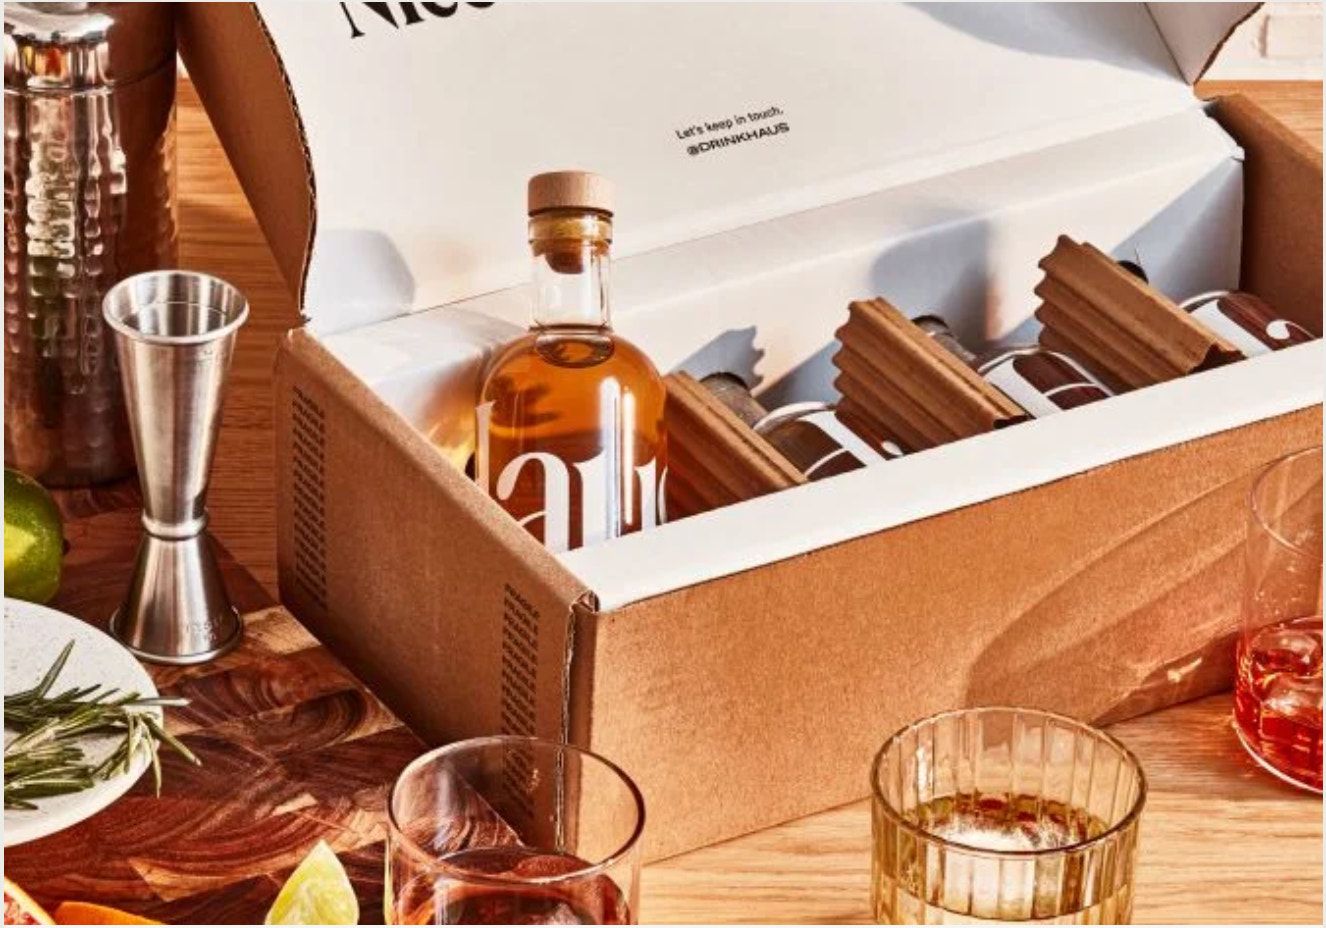 An image of Haus beverages in a gift box